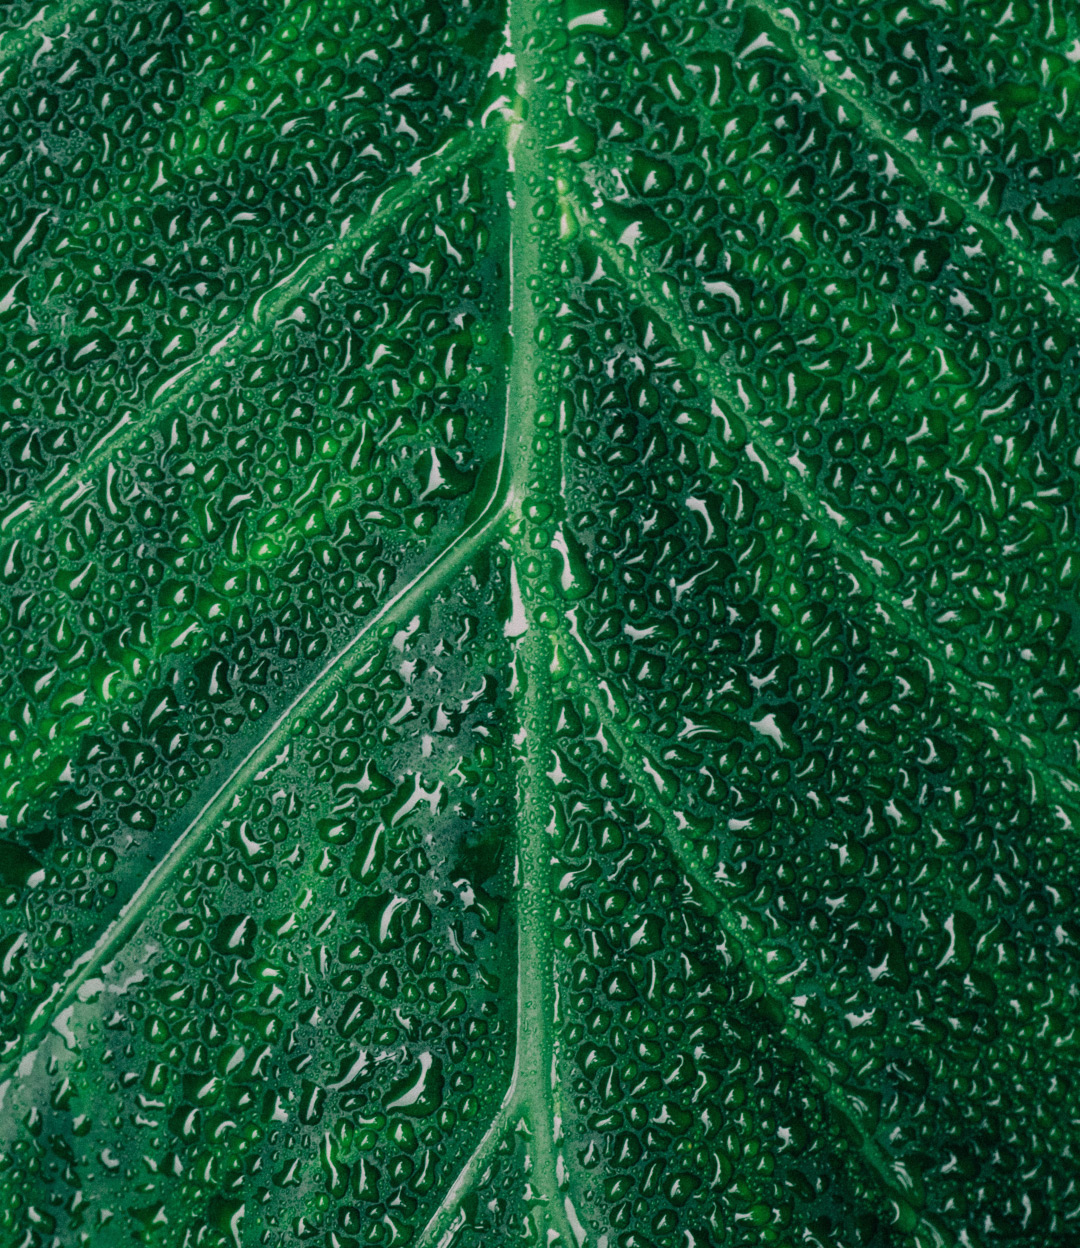 Leaf with beads of water